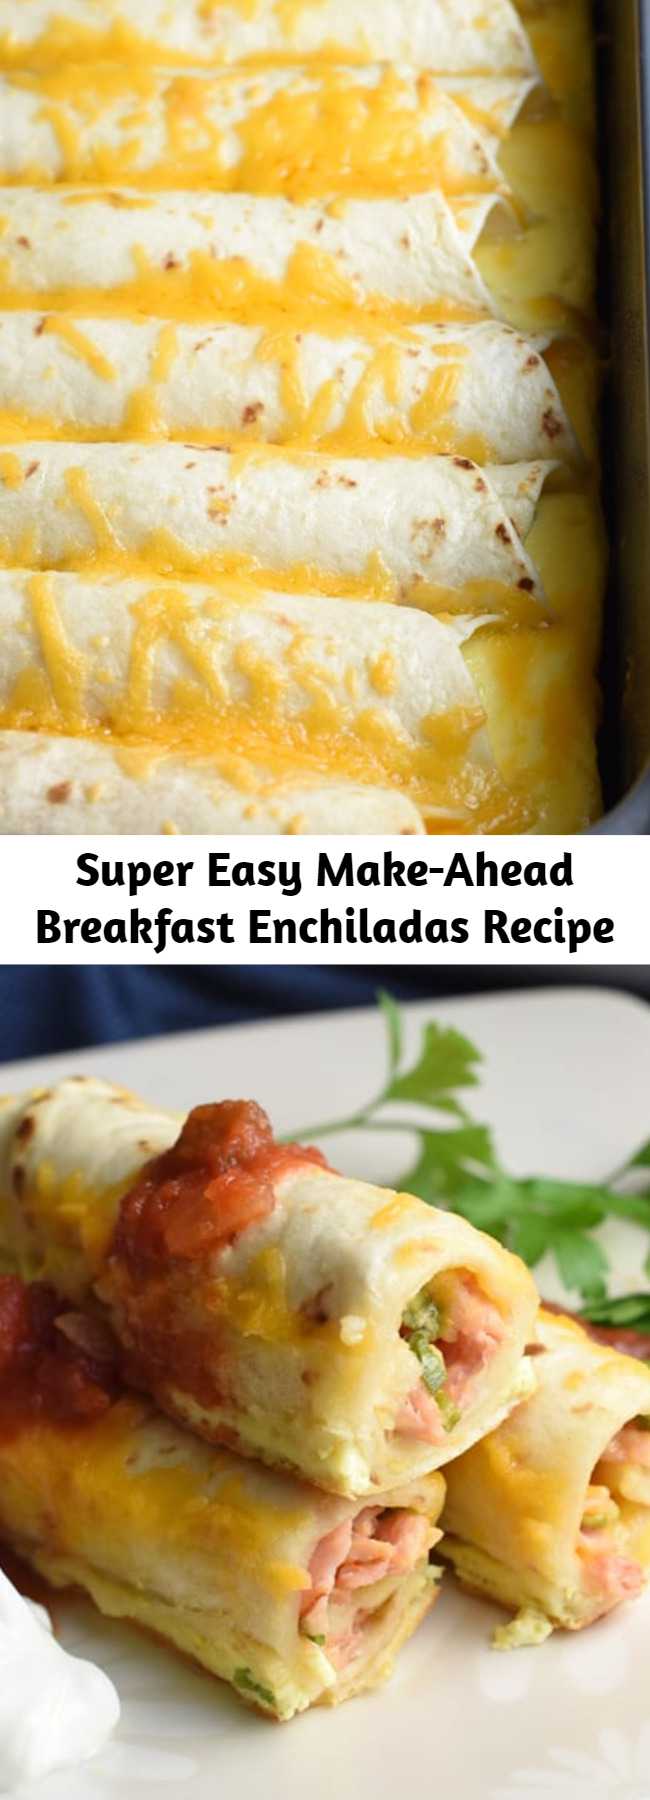 Super Easy Make-Ahead Breakfast Enchiladas Recipe - This Make-Ahead Breakfast Enchiladas recipe is a super easy and delicious casserole that can be made the night before and baked the next day! #breakfastenchiladas #makeaheadbreakfast